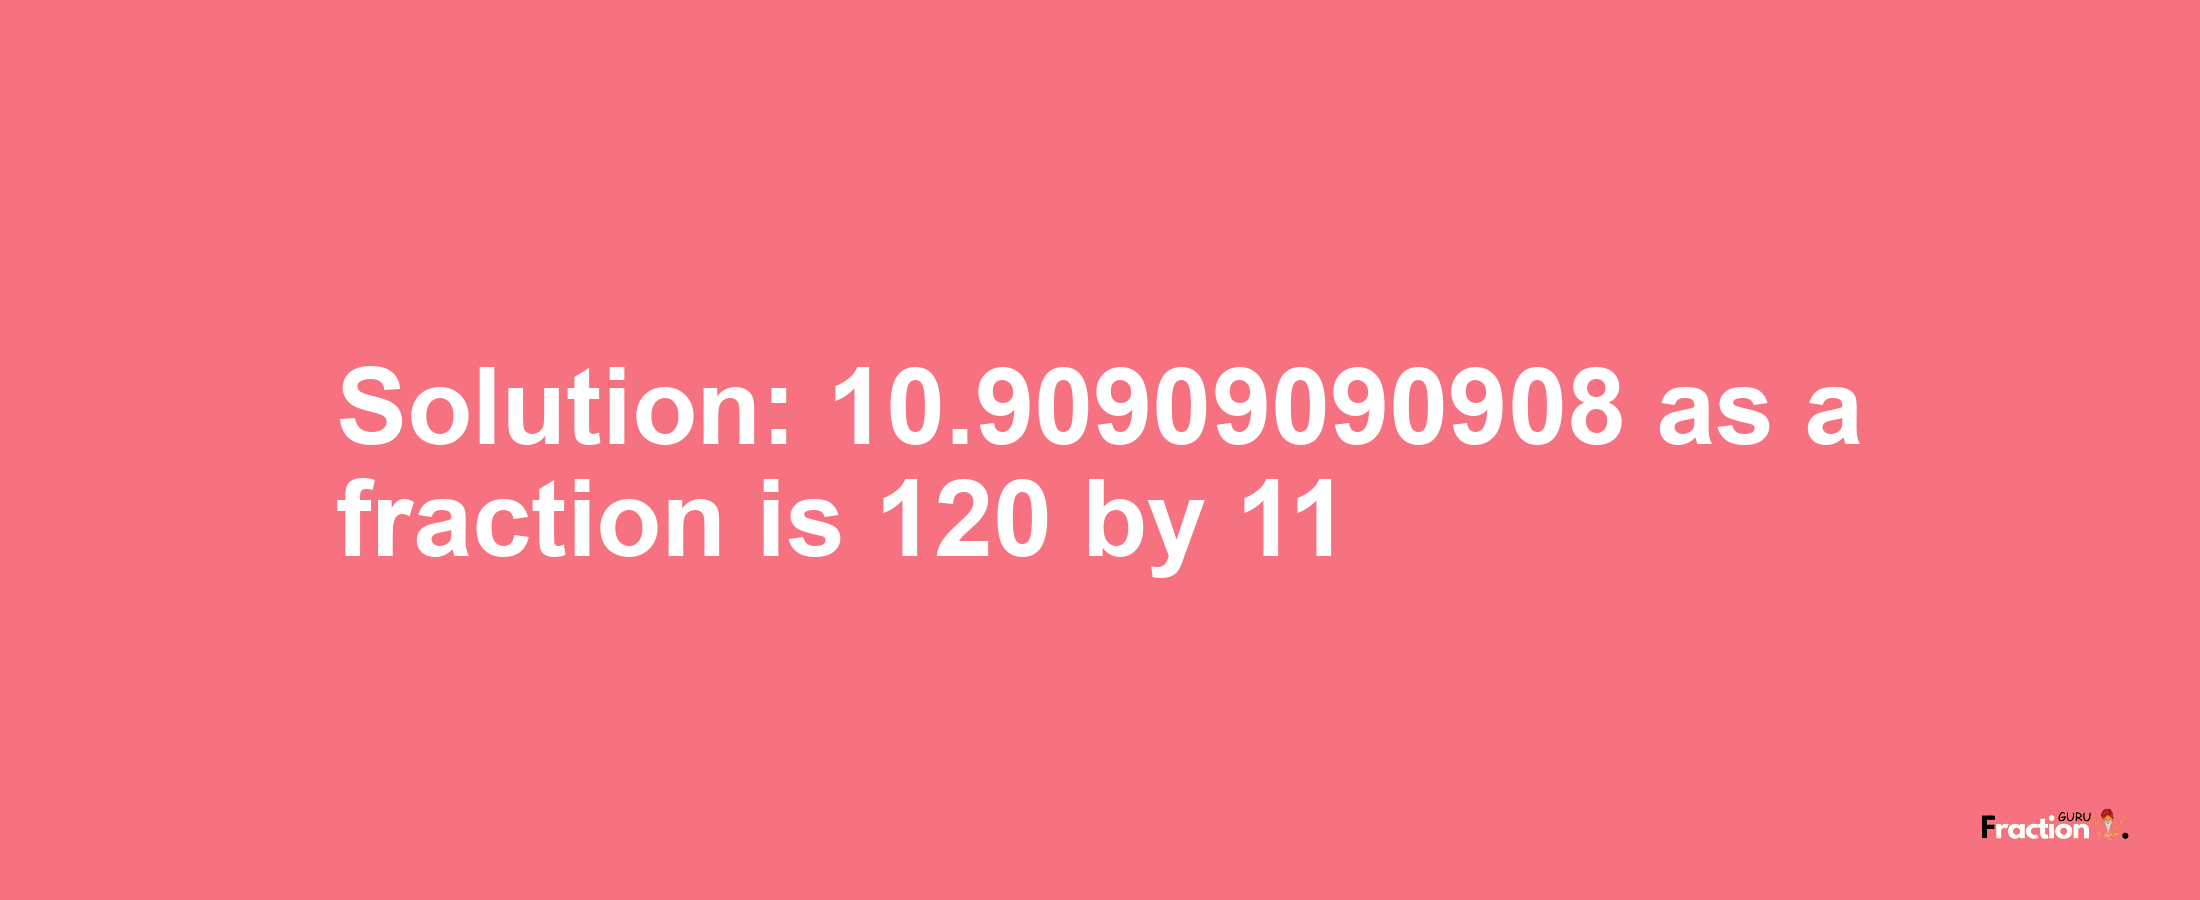 Solution:10.90909090908 as a fraction is 120/11